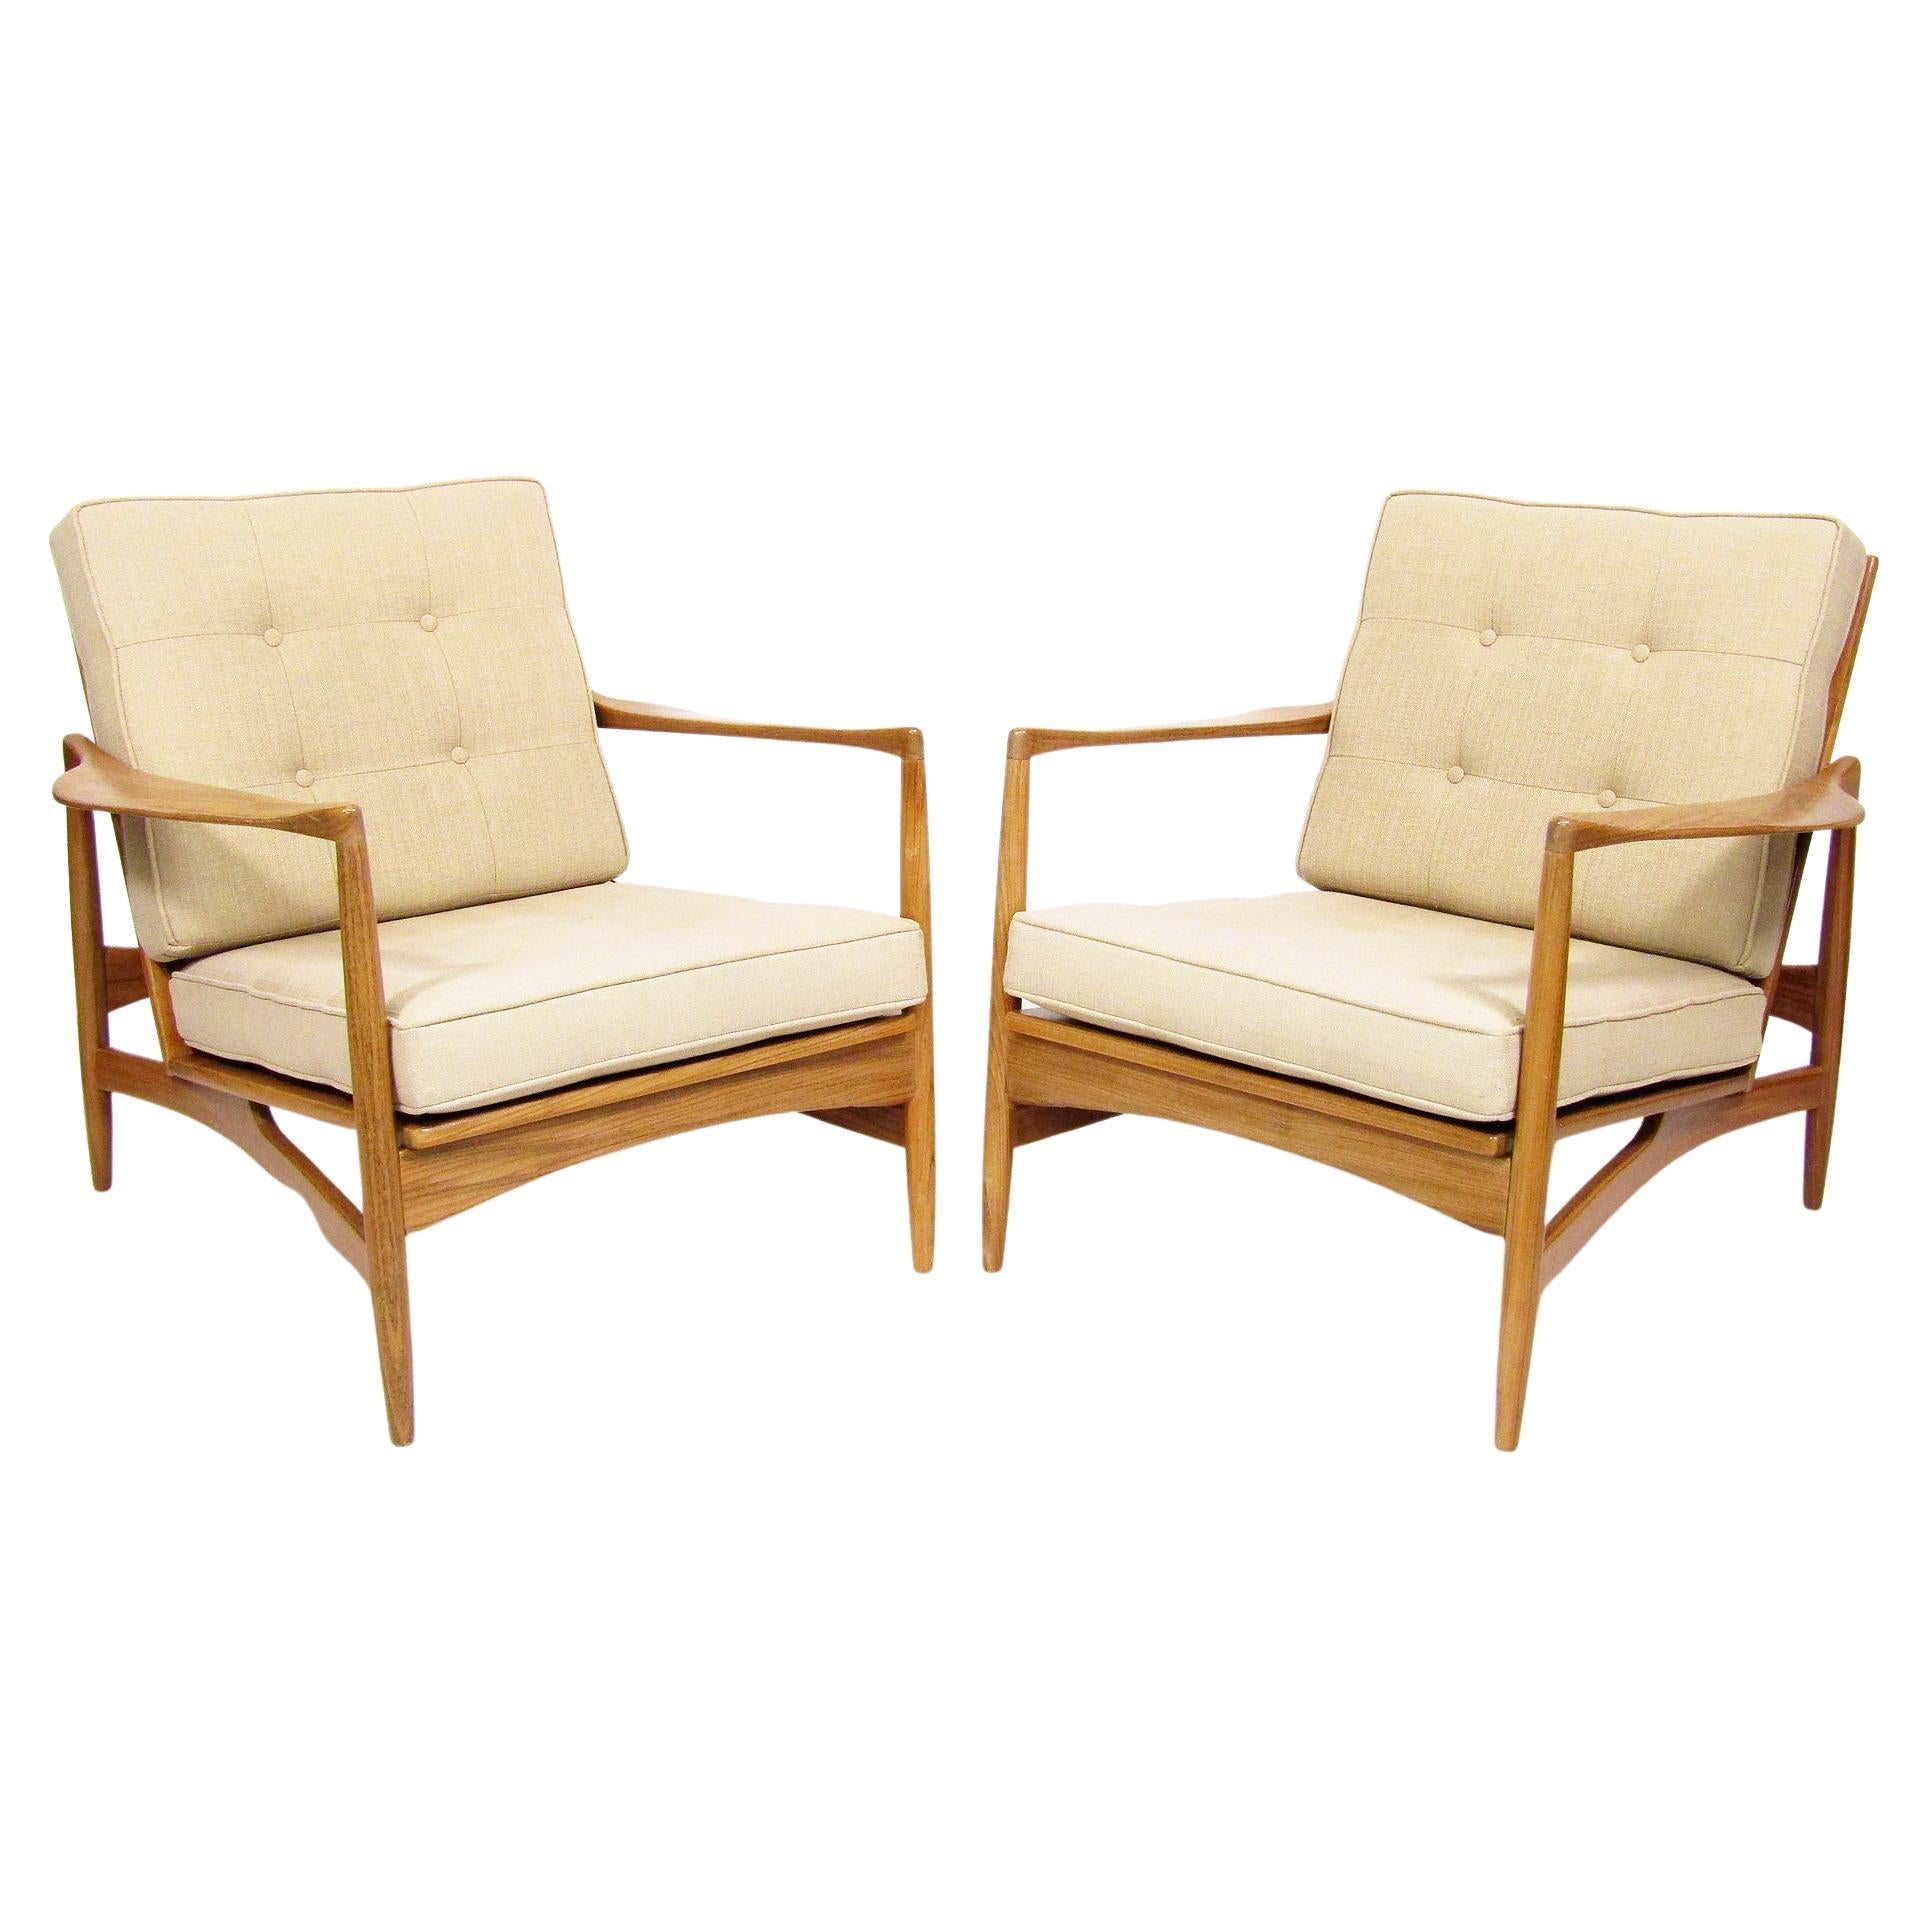 Two Rare Danish "6245" Lounge Chairs in Afromosia by Ib Kofod Larsen for G-Plan